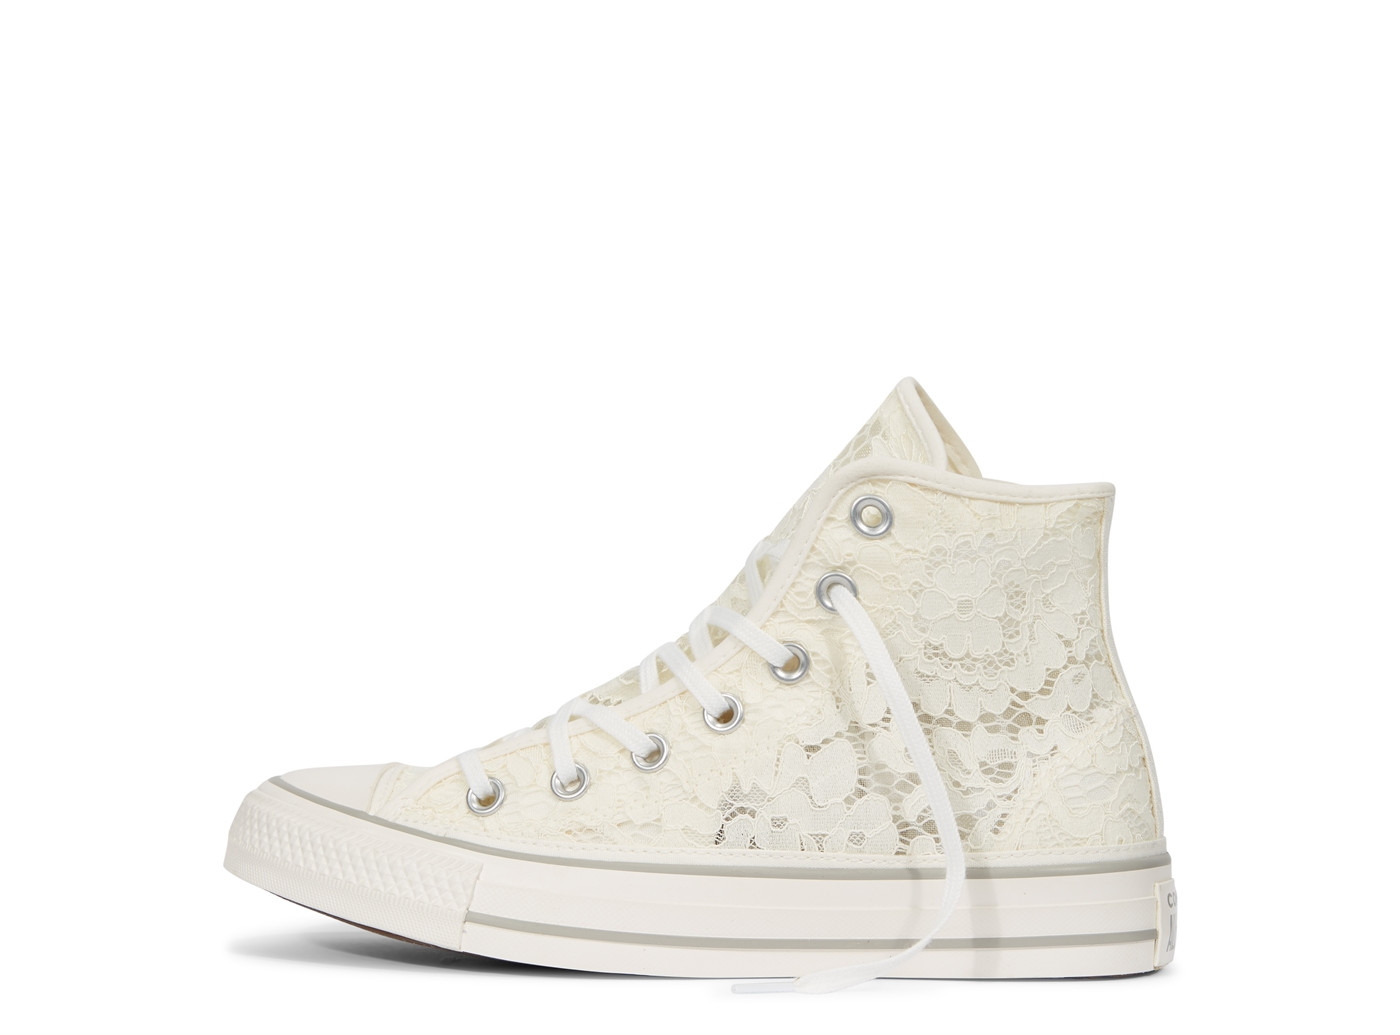 converse chuck taylor all star flower lace